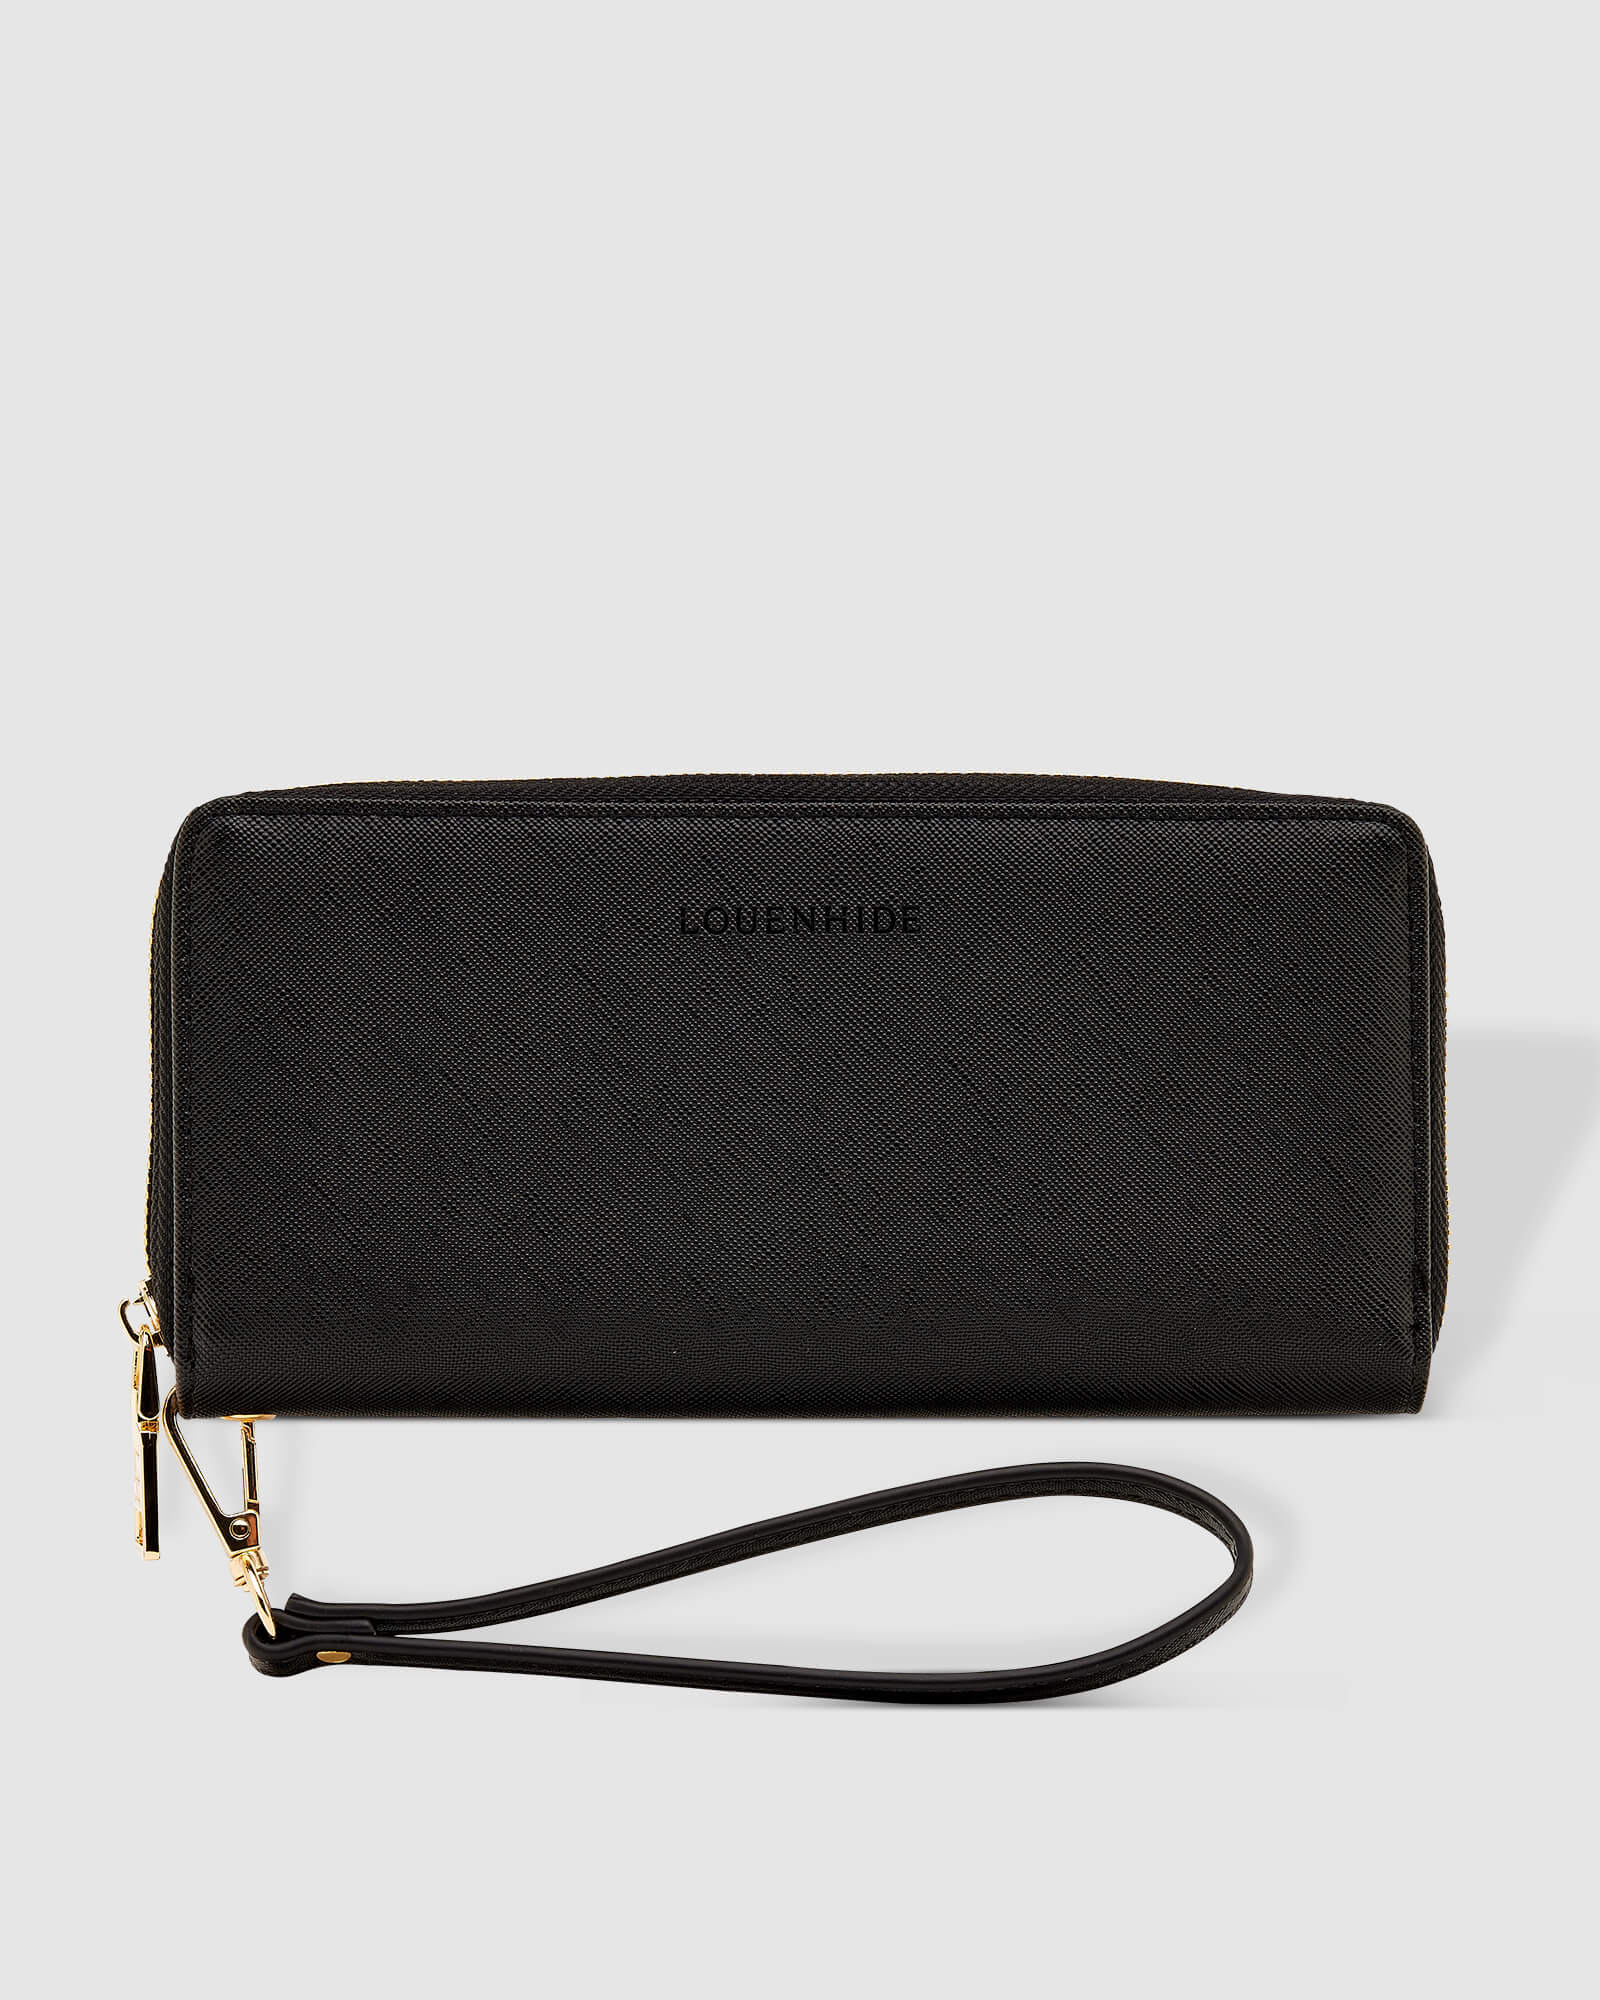 Jessica Wallet - Black - Louenhide - FUDGE Gifts Home Lifestyle